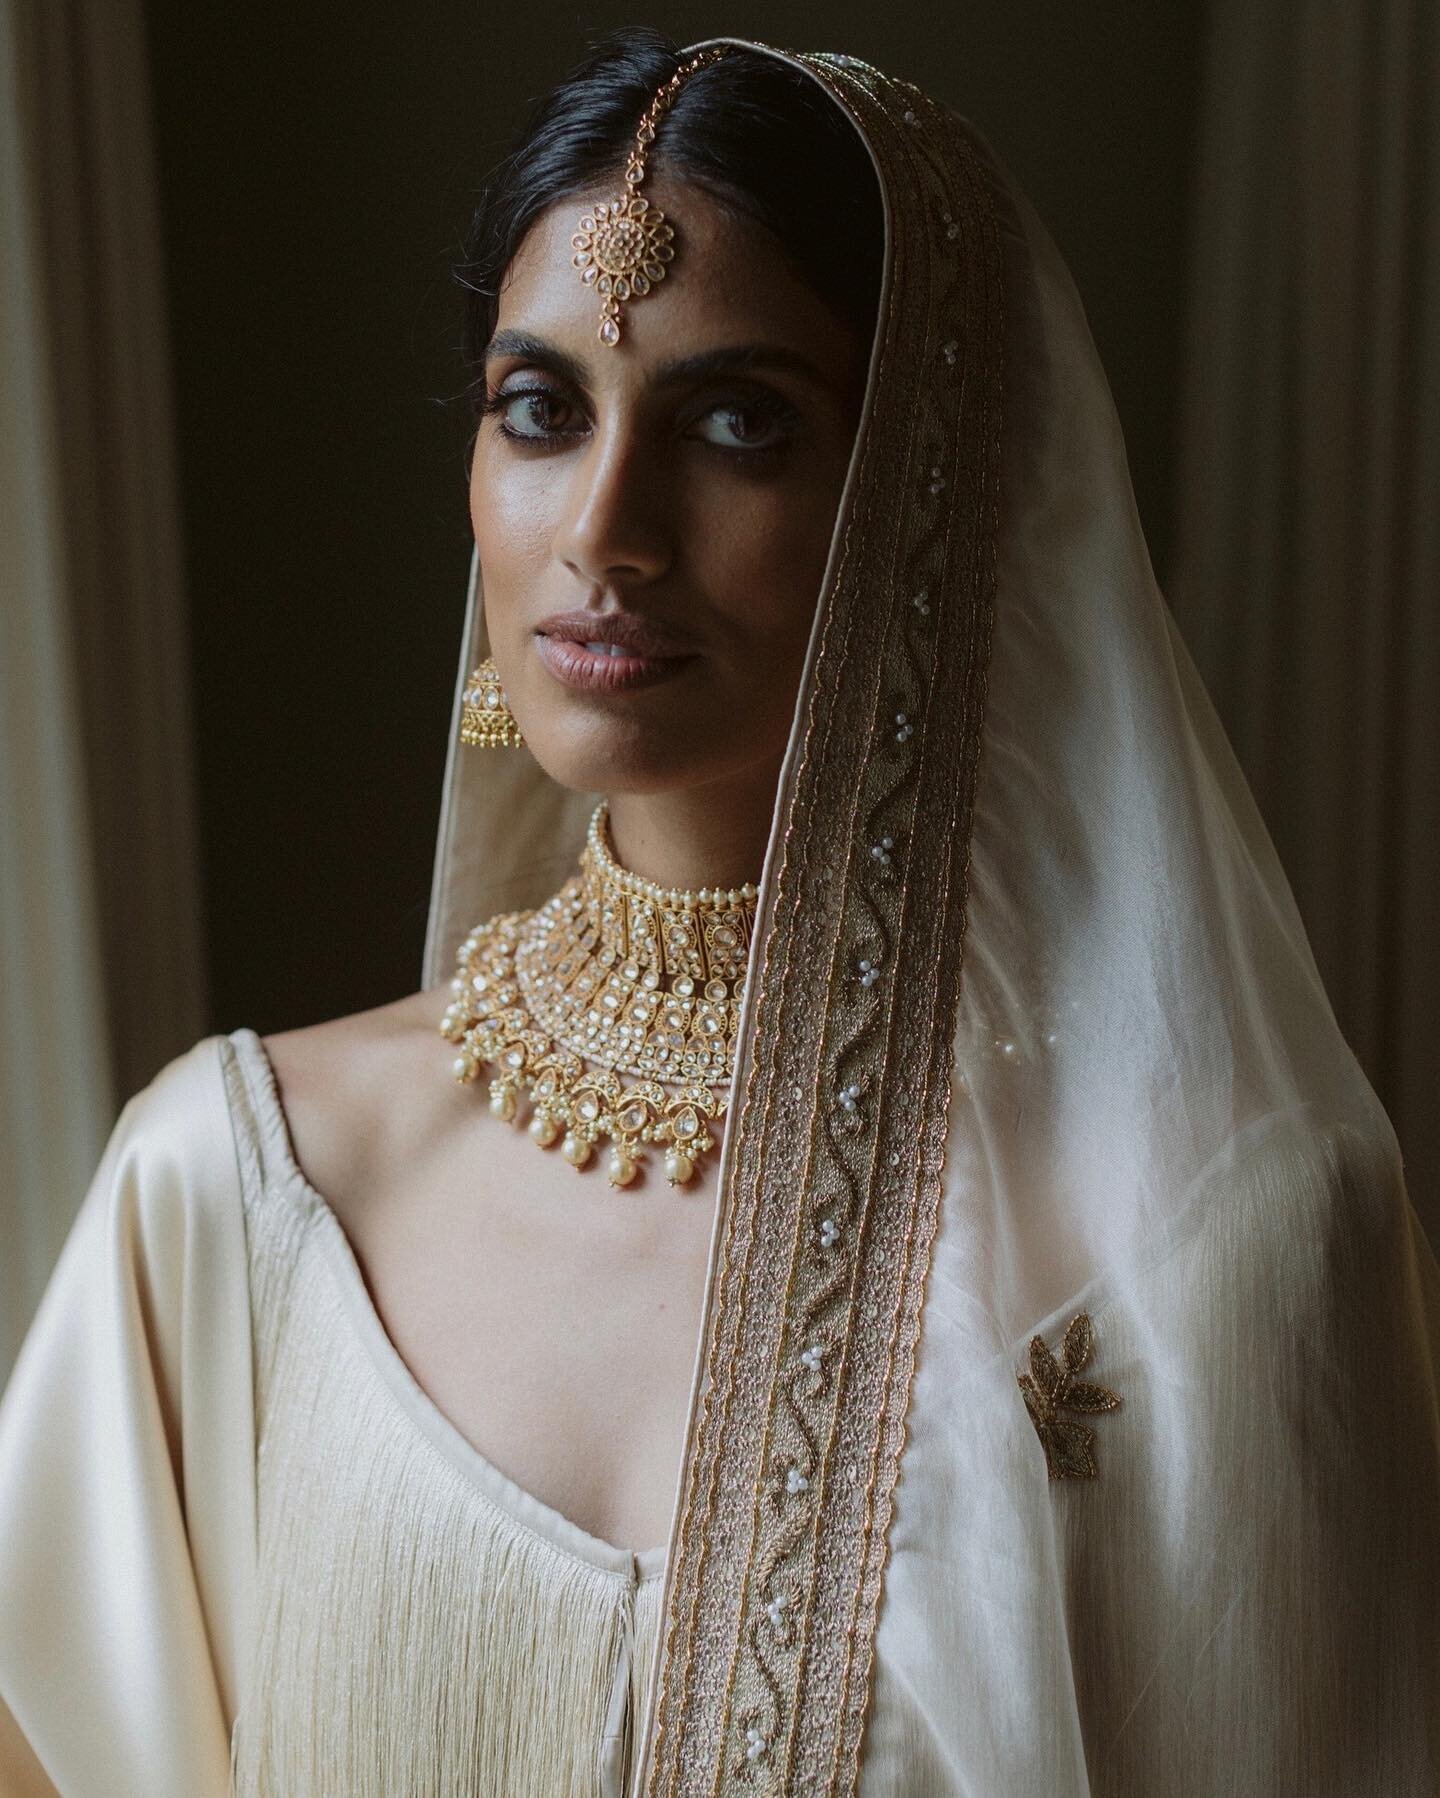 Having done Alisha&rsquo;s makeup on many occasions and having known each other since we were young, meant working with Alisha a very special and memorable experience 🤍
⠀⠀⠀⠀⠀⠀⠀⠀⠀
It was an honor to help bring your editorial-inspired, glowing bridal 